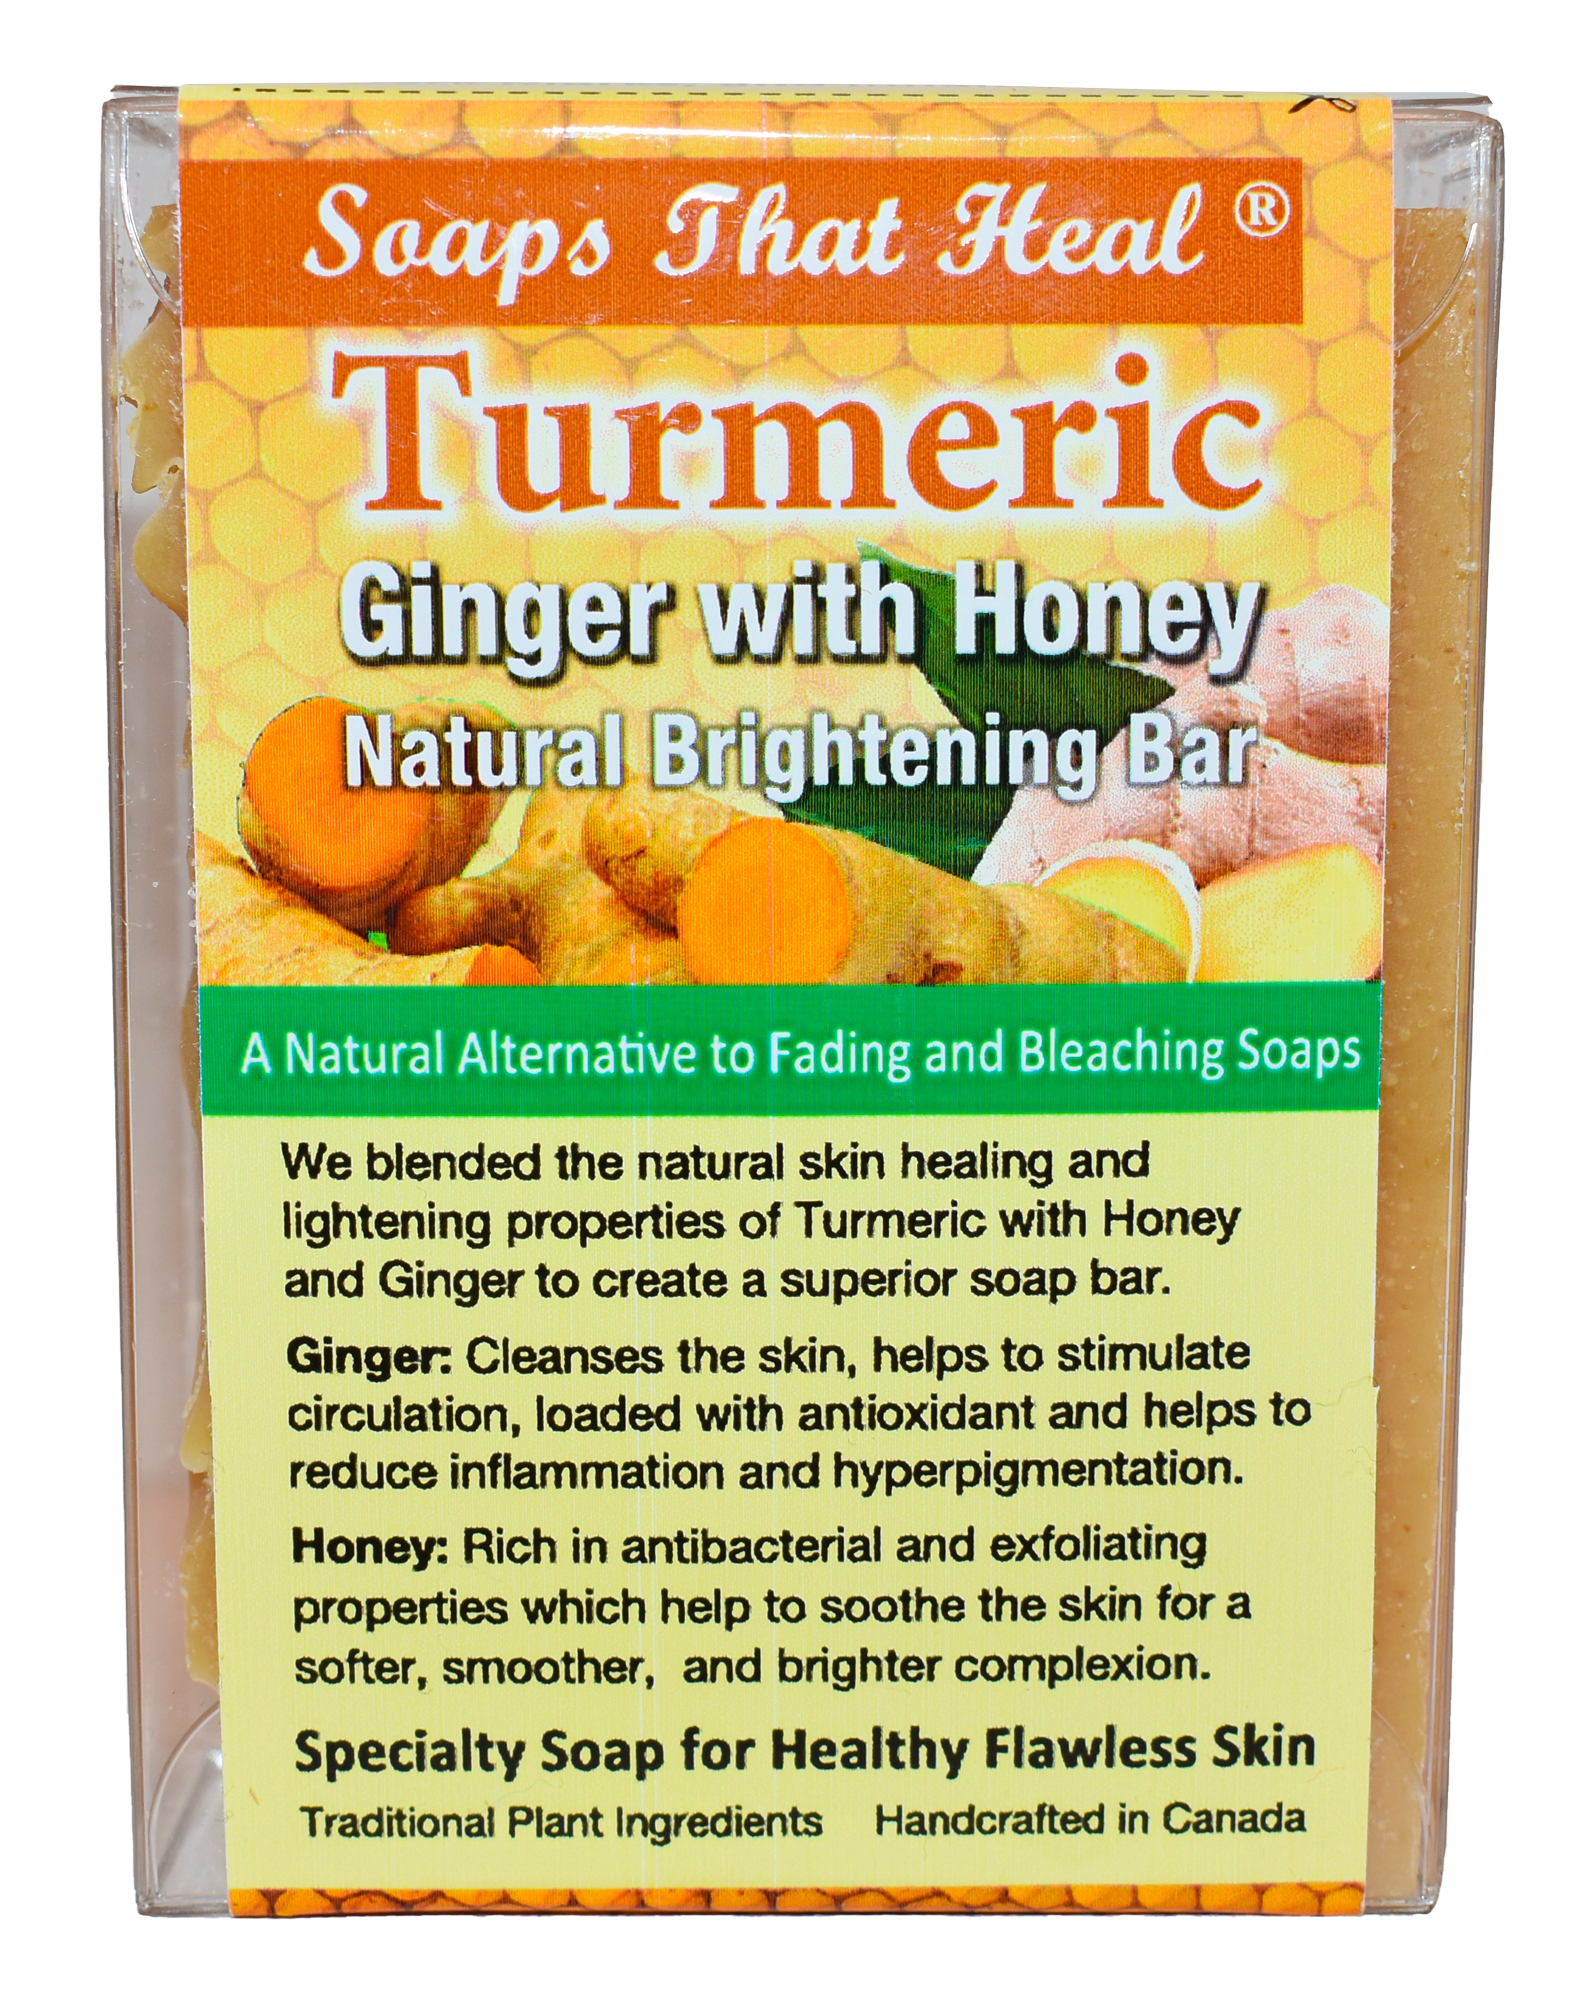 Turmeric Ginger with Honey Brightening Bar an effective solution for facial hyperpigmentation. Infused with turmeric, ginger, and honey, it helps reduce dark spots, promoting a brighter, even-toned complexion,Ginger:  Cleanses the skin, helps to stimulate circulation, loaded with antioxidant and helps to reduce inflammation and hyperpigmentation.  Honey:  Rich in antibacterial and exfoliating properties which help to soothe the skin for a softer, smoother,  and brighter complexion. 